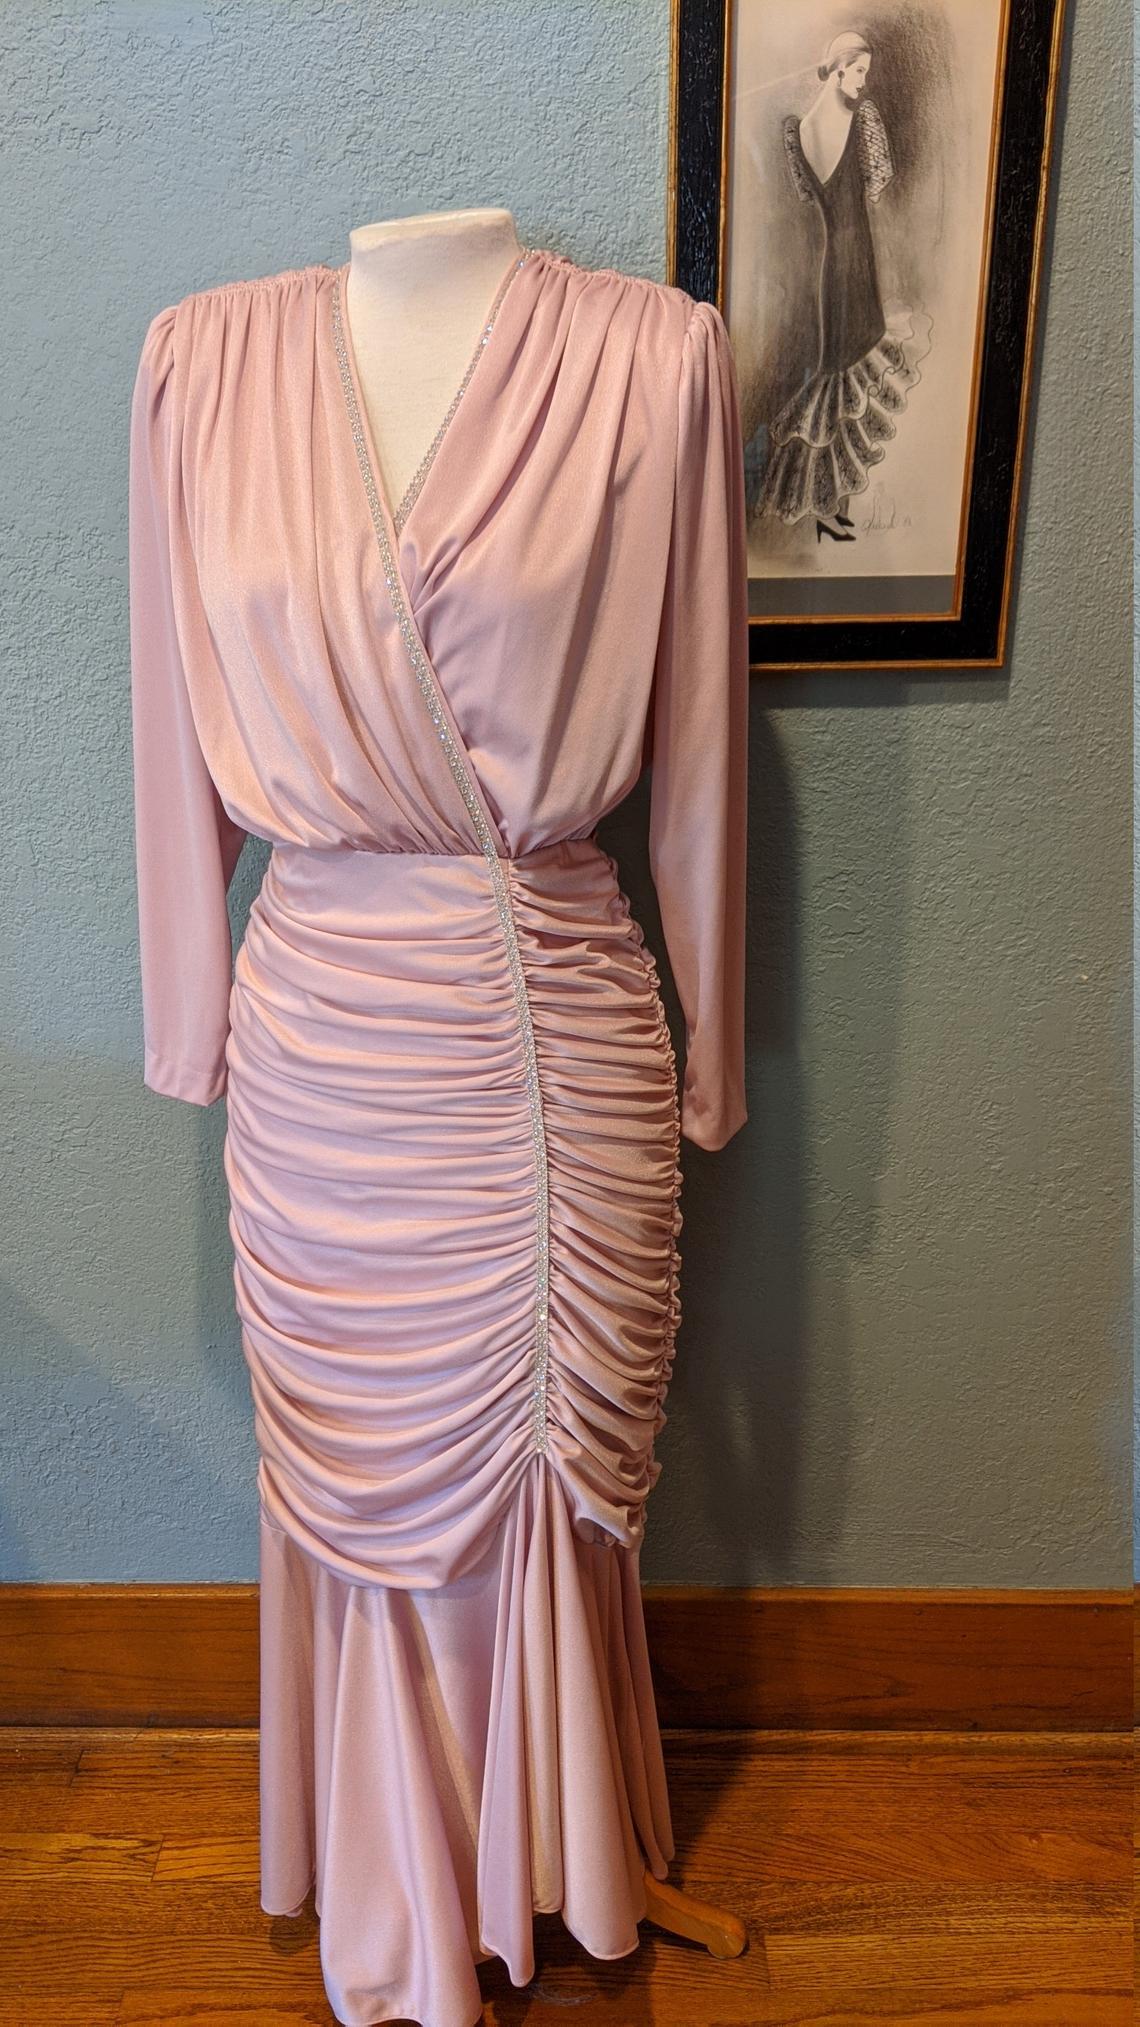 80's Ruched Rhinestone Long Evening Dress Light Pink Wiggle Dress Tight Folds Gathered Around Shoulders And Hips,pl2664